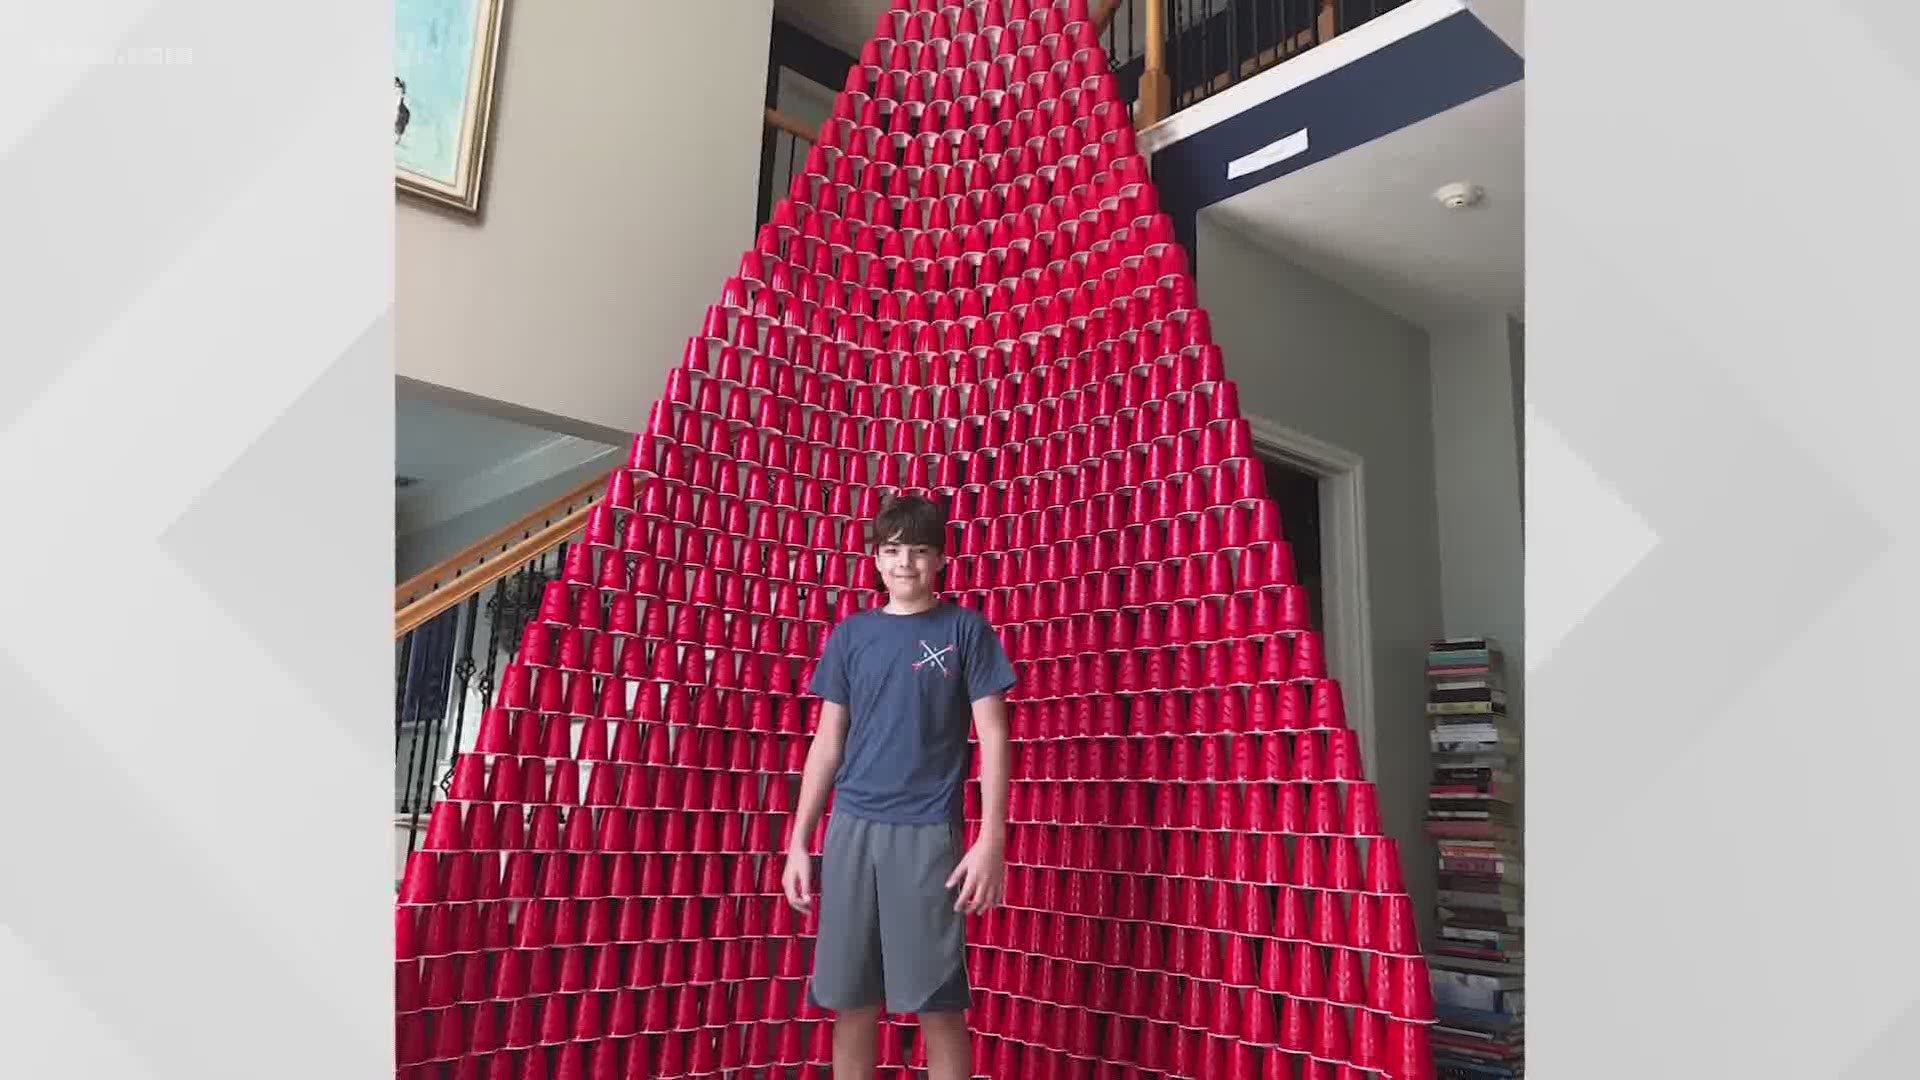 David Harder is keeping himself busy amid the coronavirus pandemic by building a tower using plastic cups from Costco.